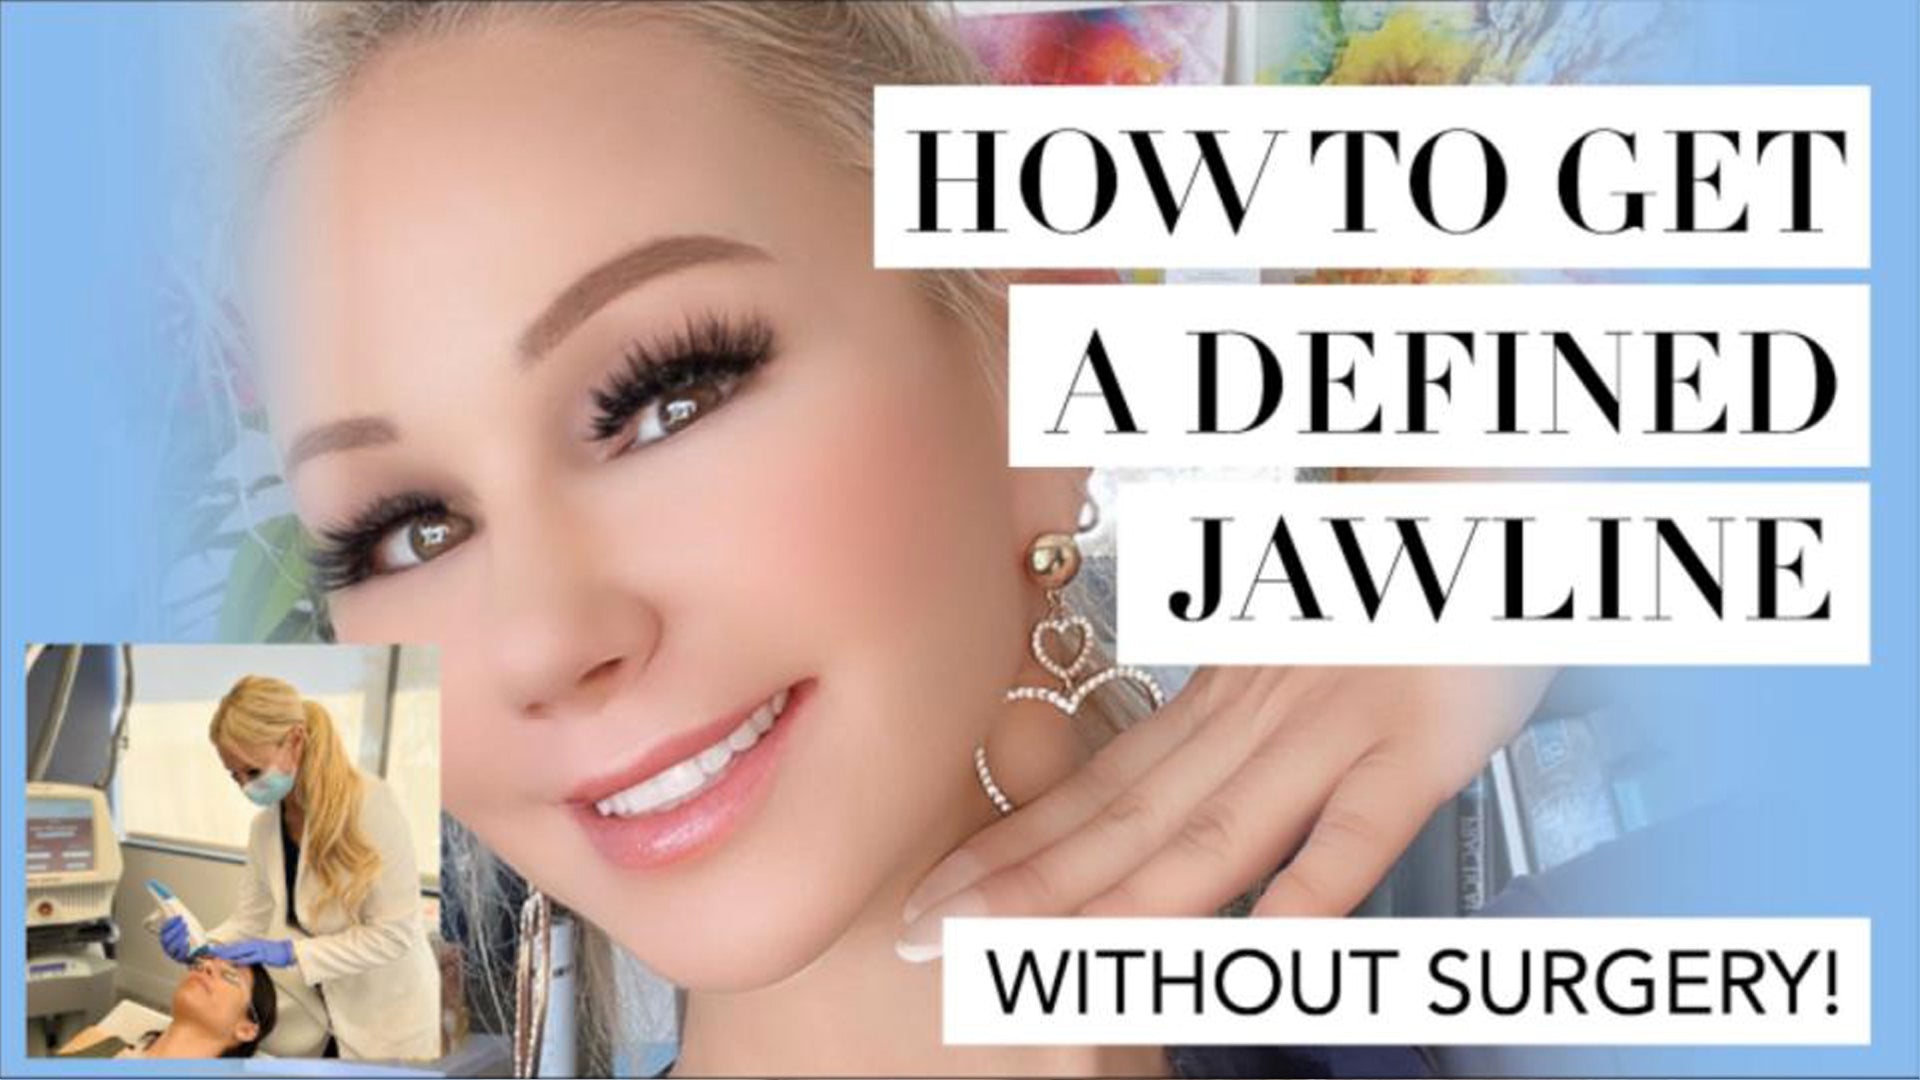 how to get a chiseled jaw